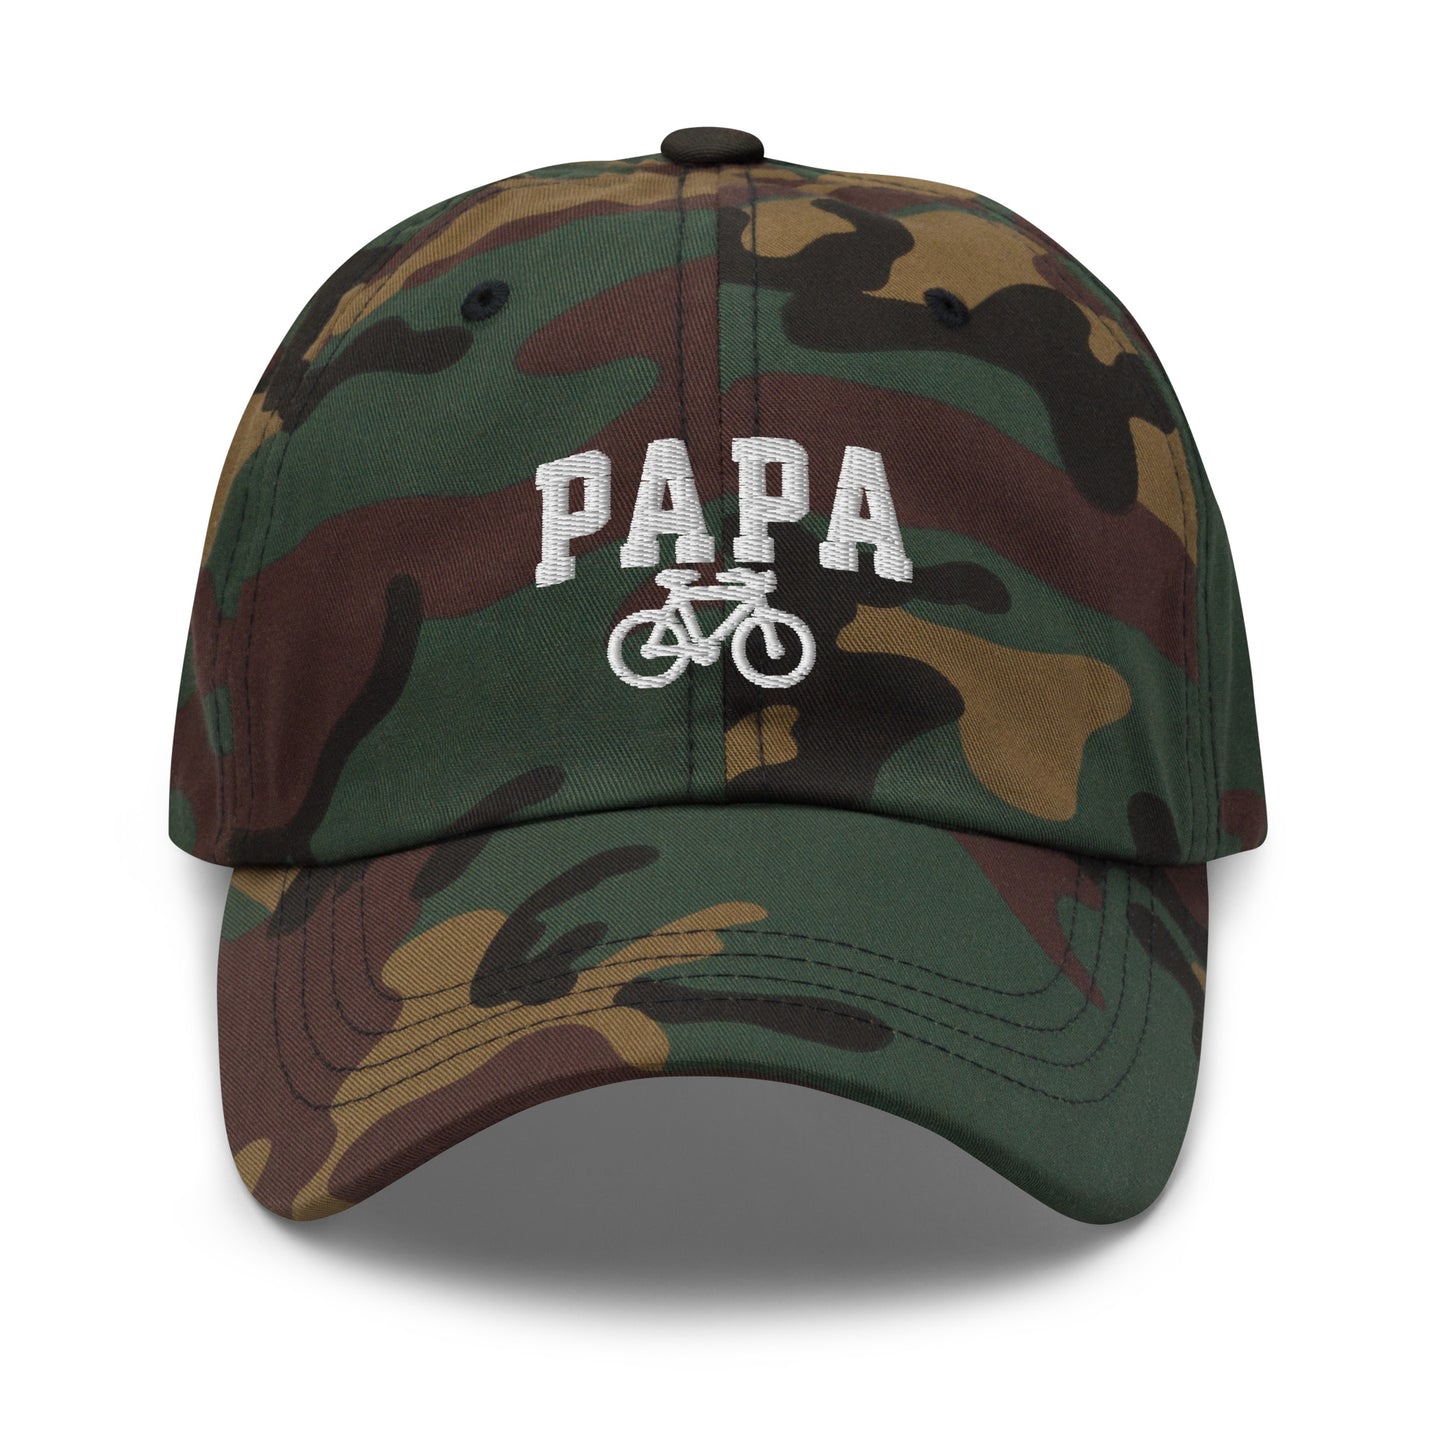 Papa and Bike Embroidered Hat